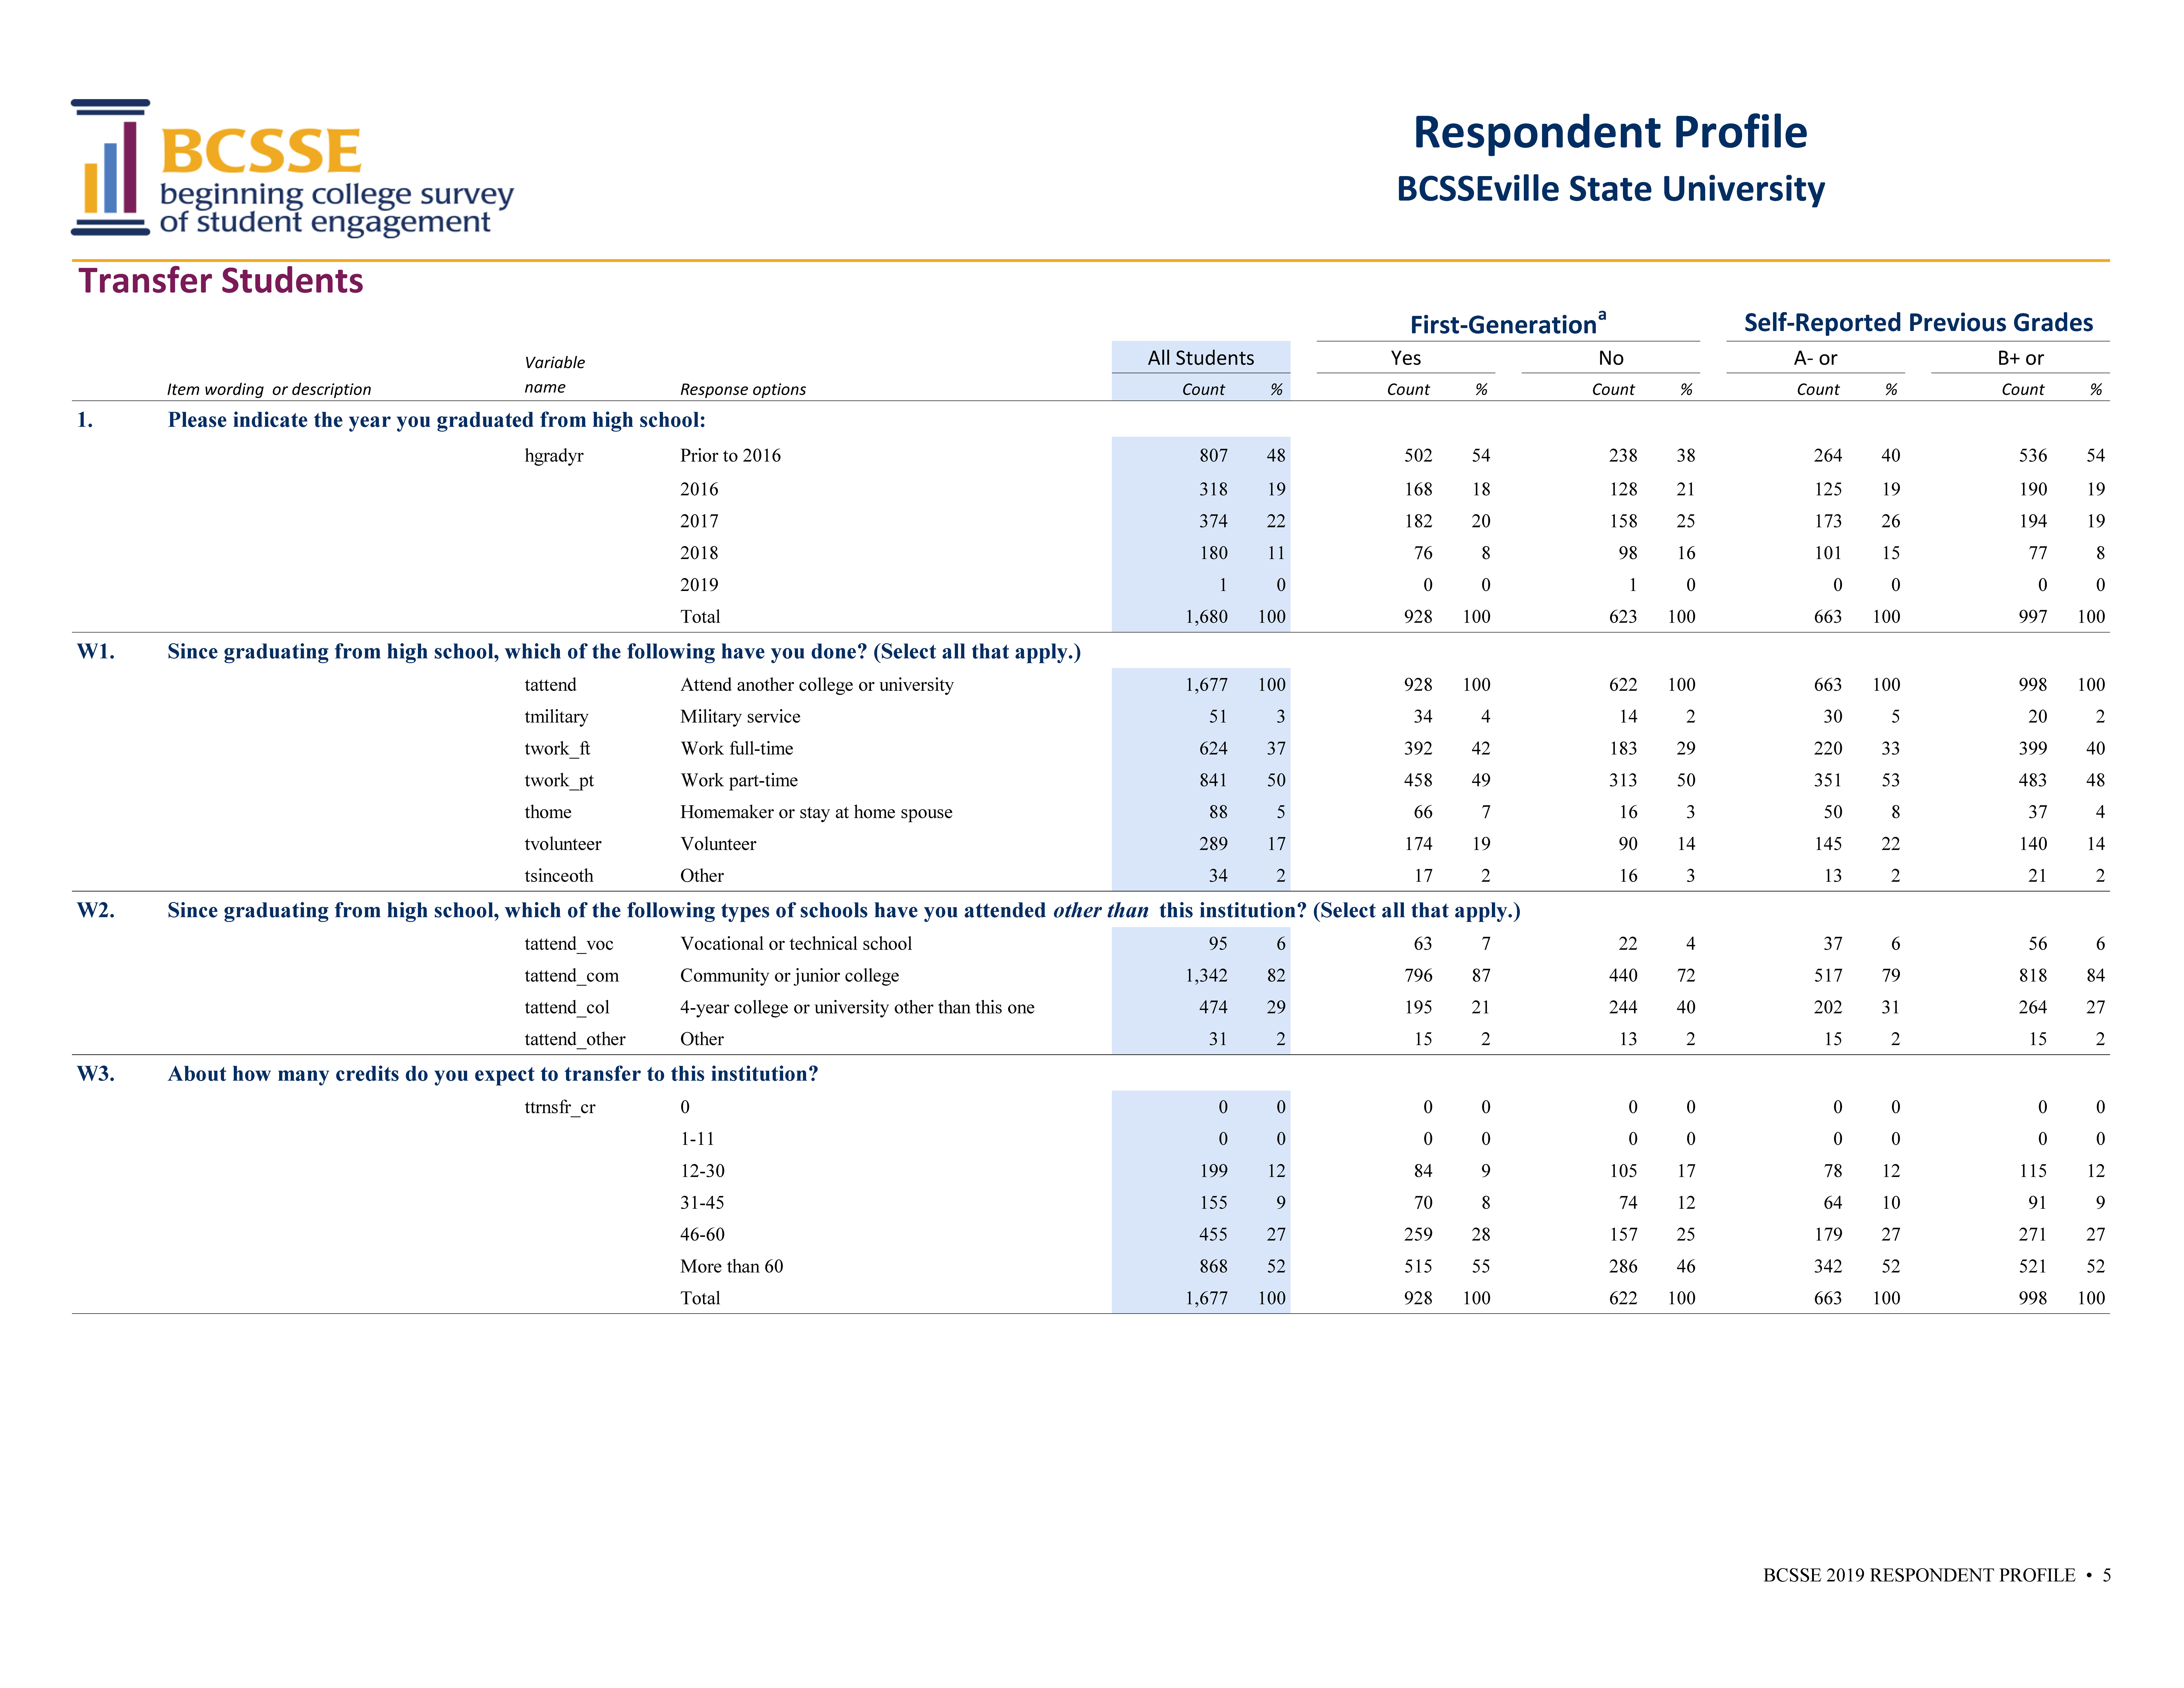 BCSSE Institutional Report example for Transfer students.